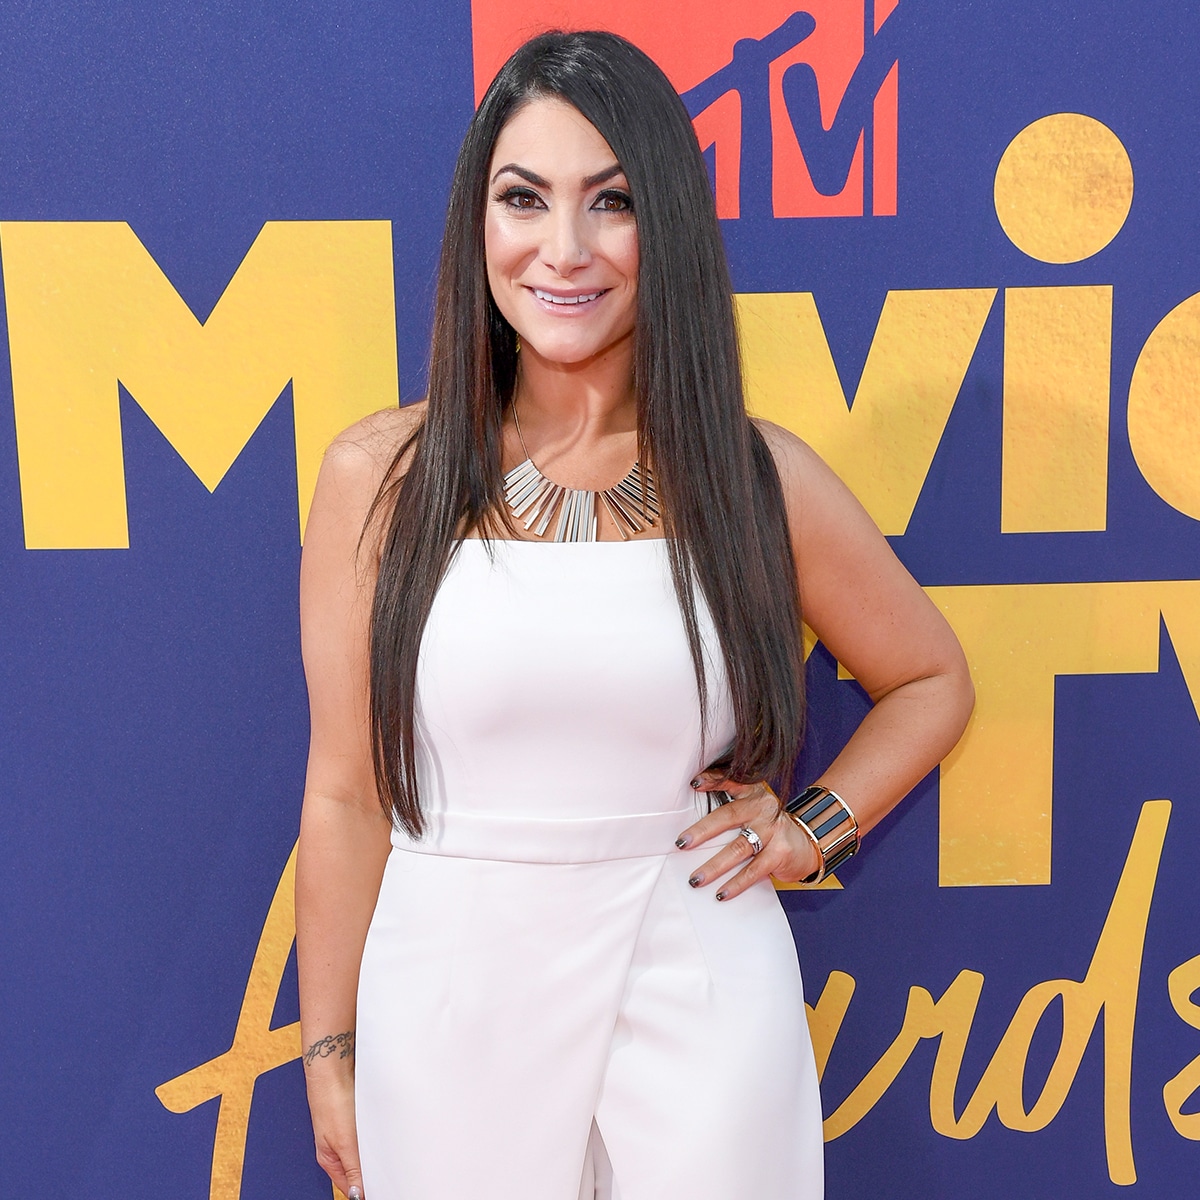 Deena Jersey Shore Husband And Net Worth: Is She Married?